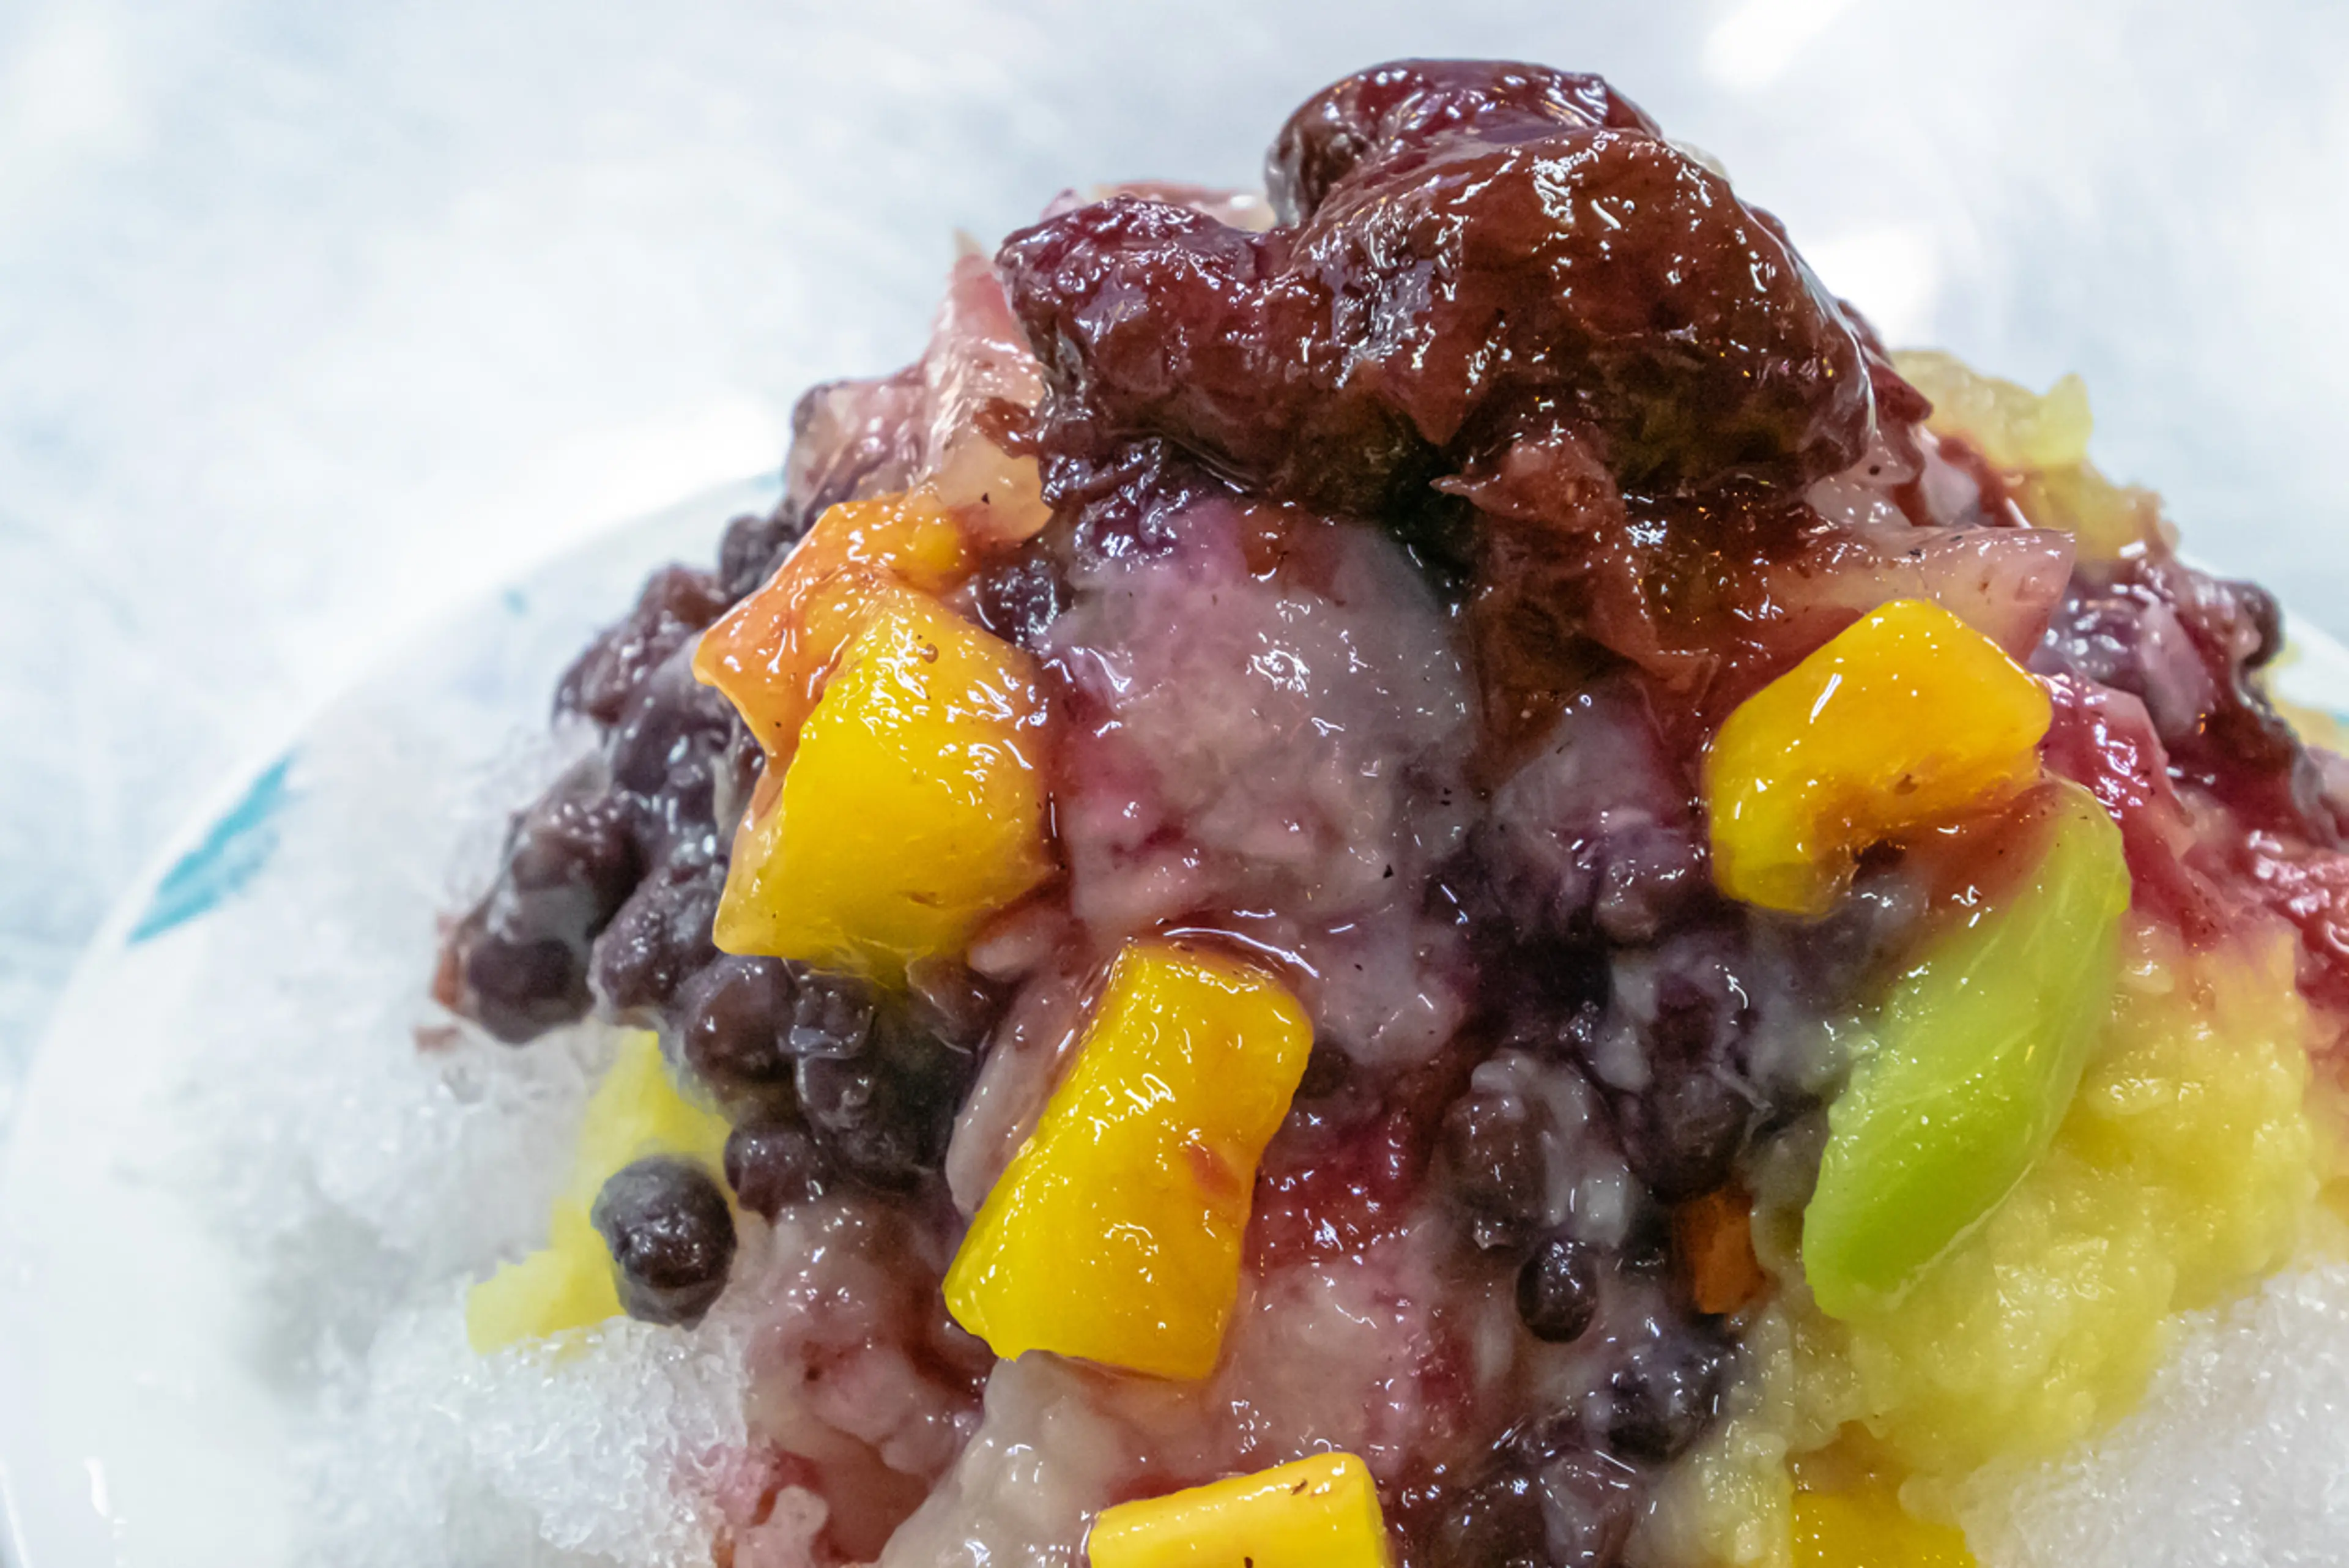 Shaved Ice Mountain